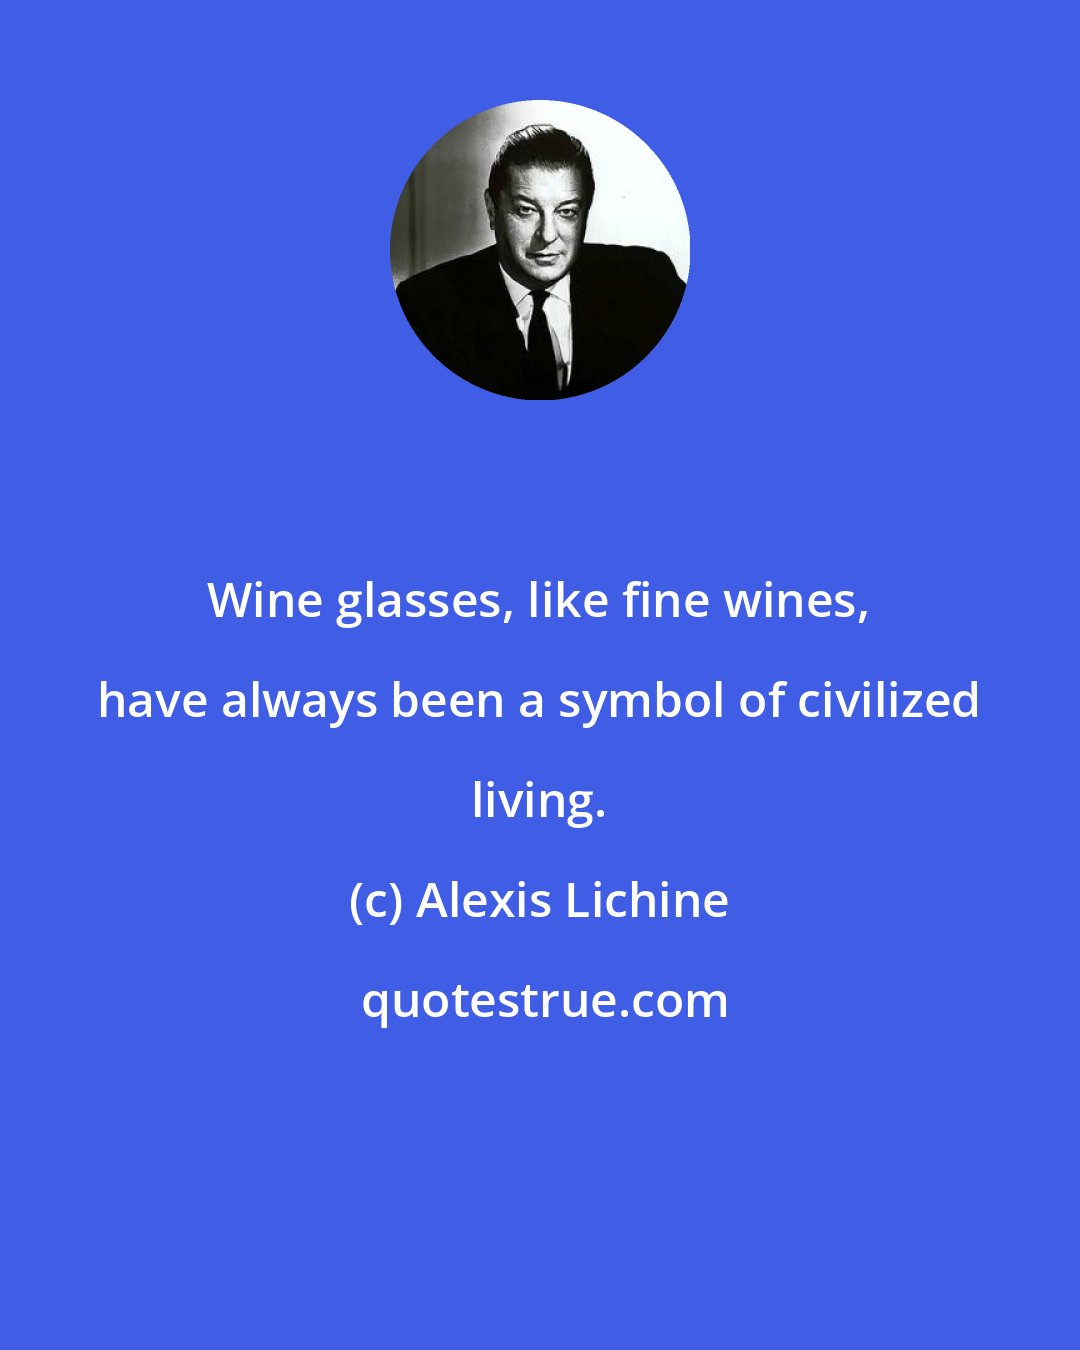 Alexis Lichine: Wine glasses, like fine wines, have always been a symbol of civilized living.